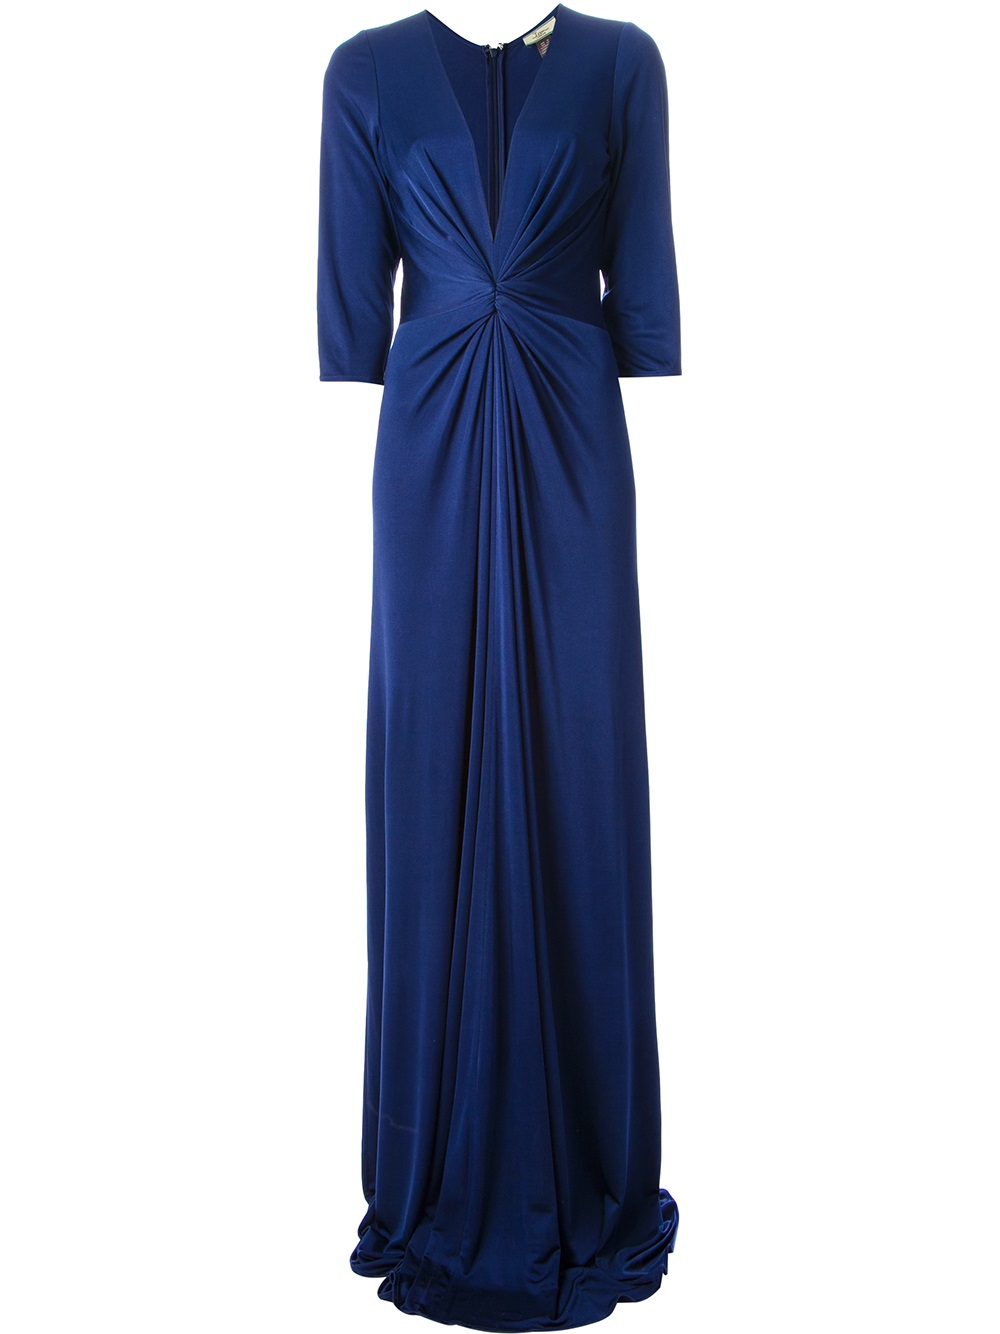 Lyst - Issa Long Ruched Gown in Blue